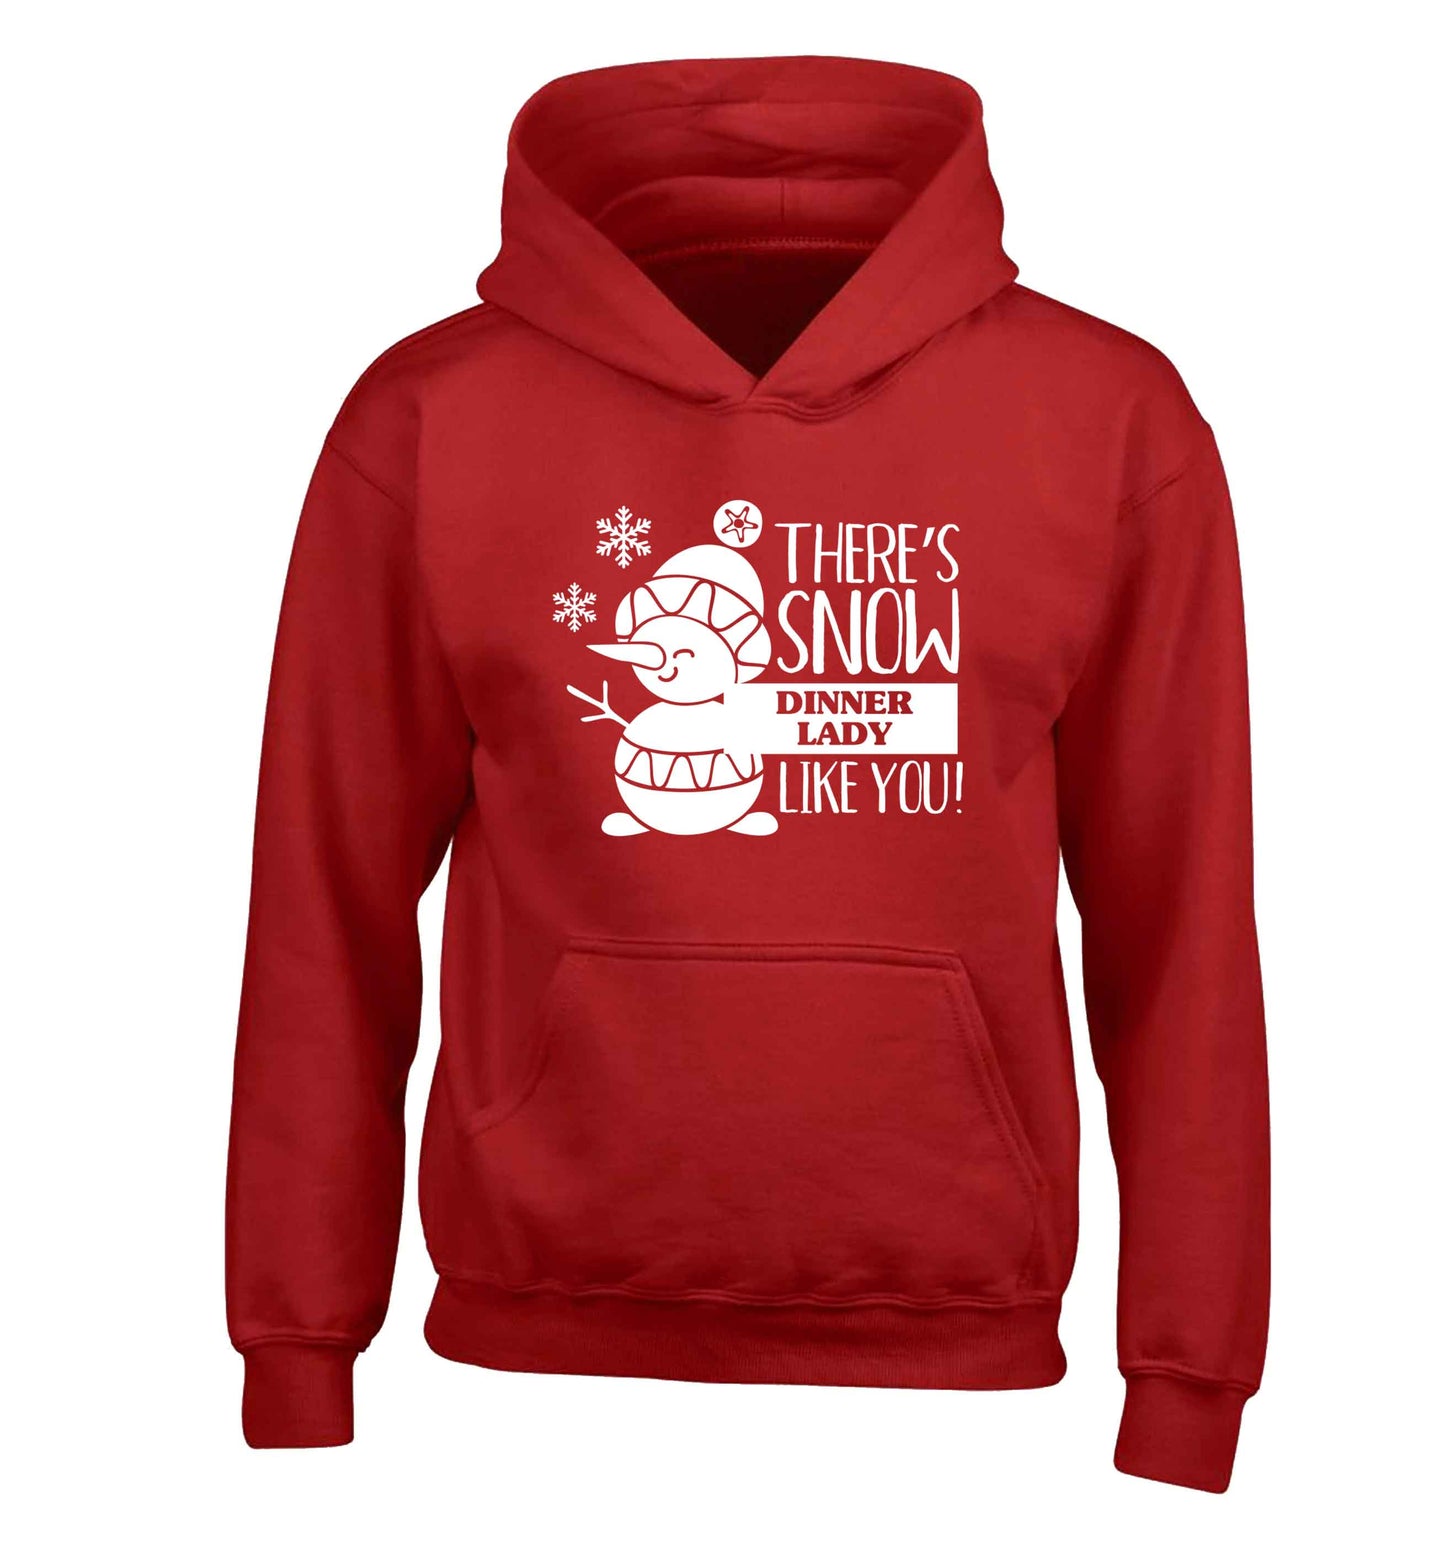 There's snow dinner lady like you children's red hoodie 12-13 Years